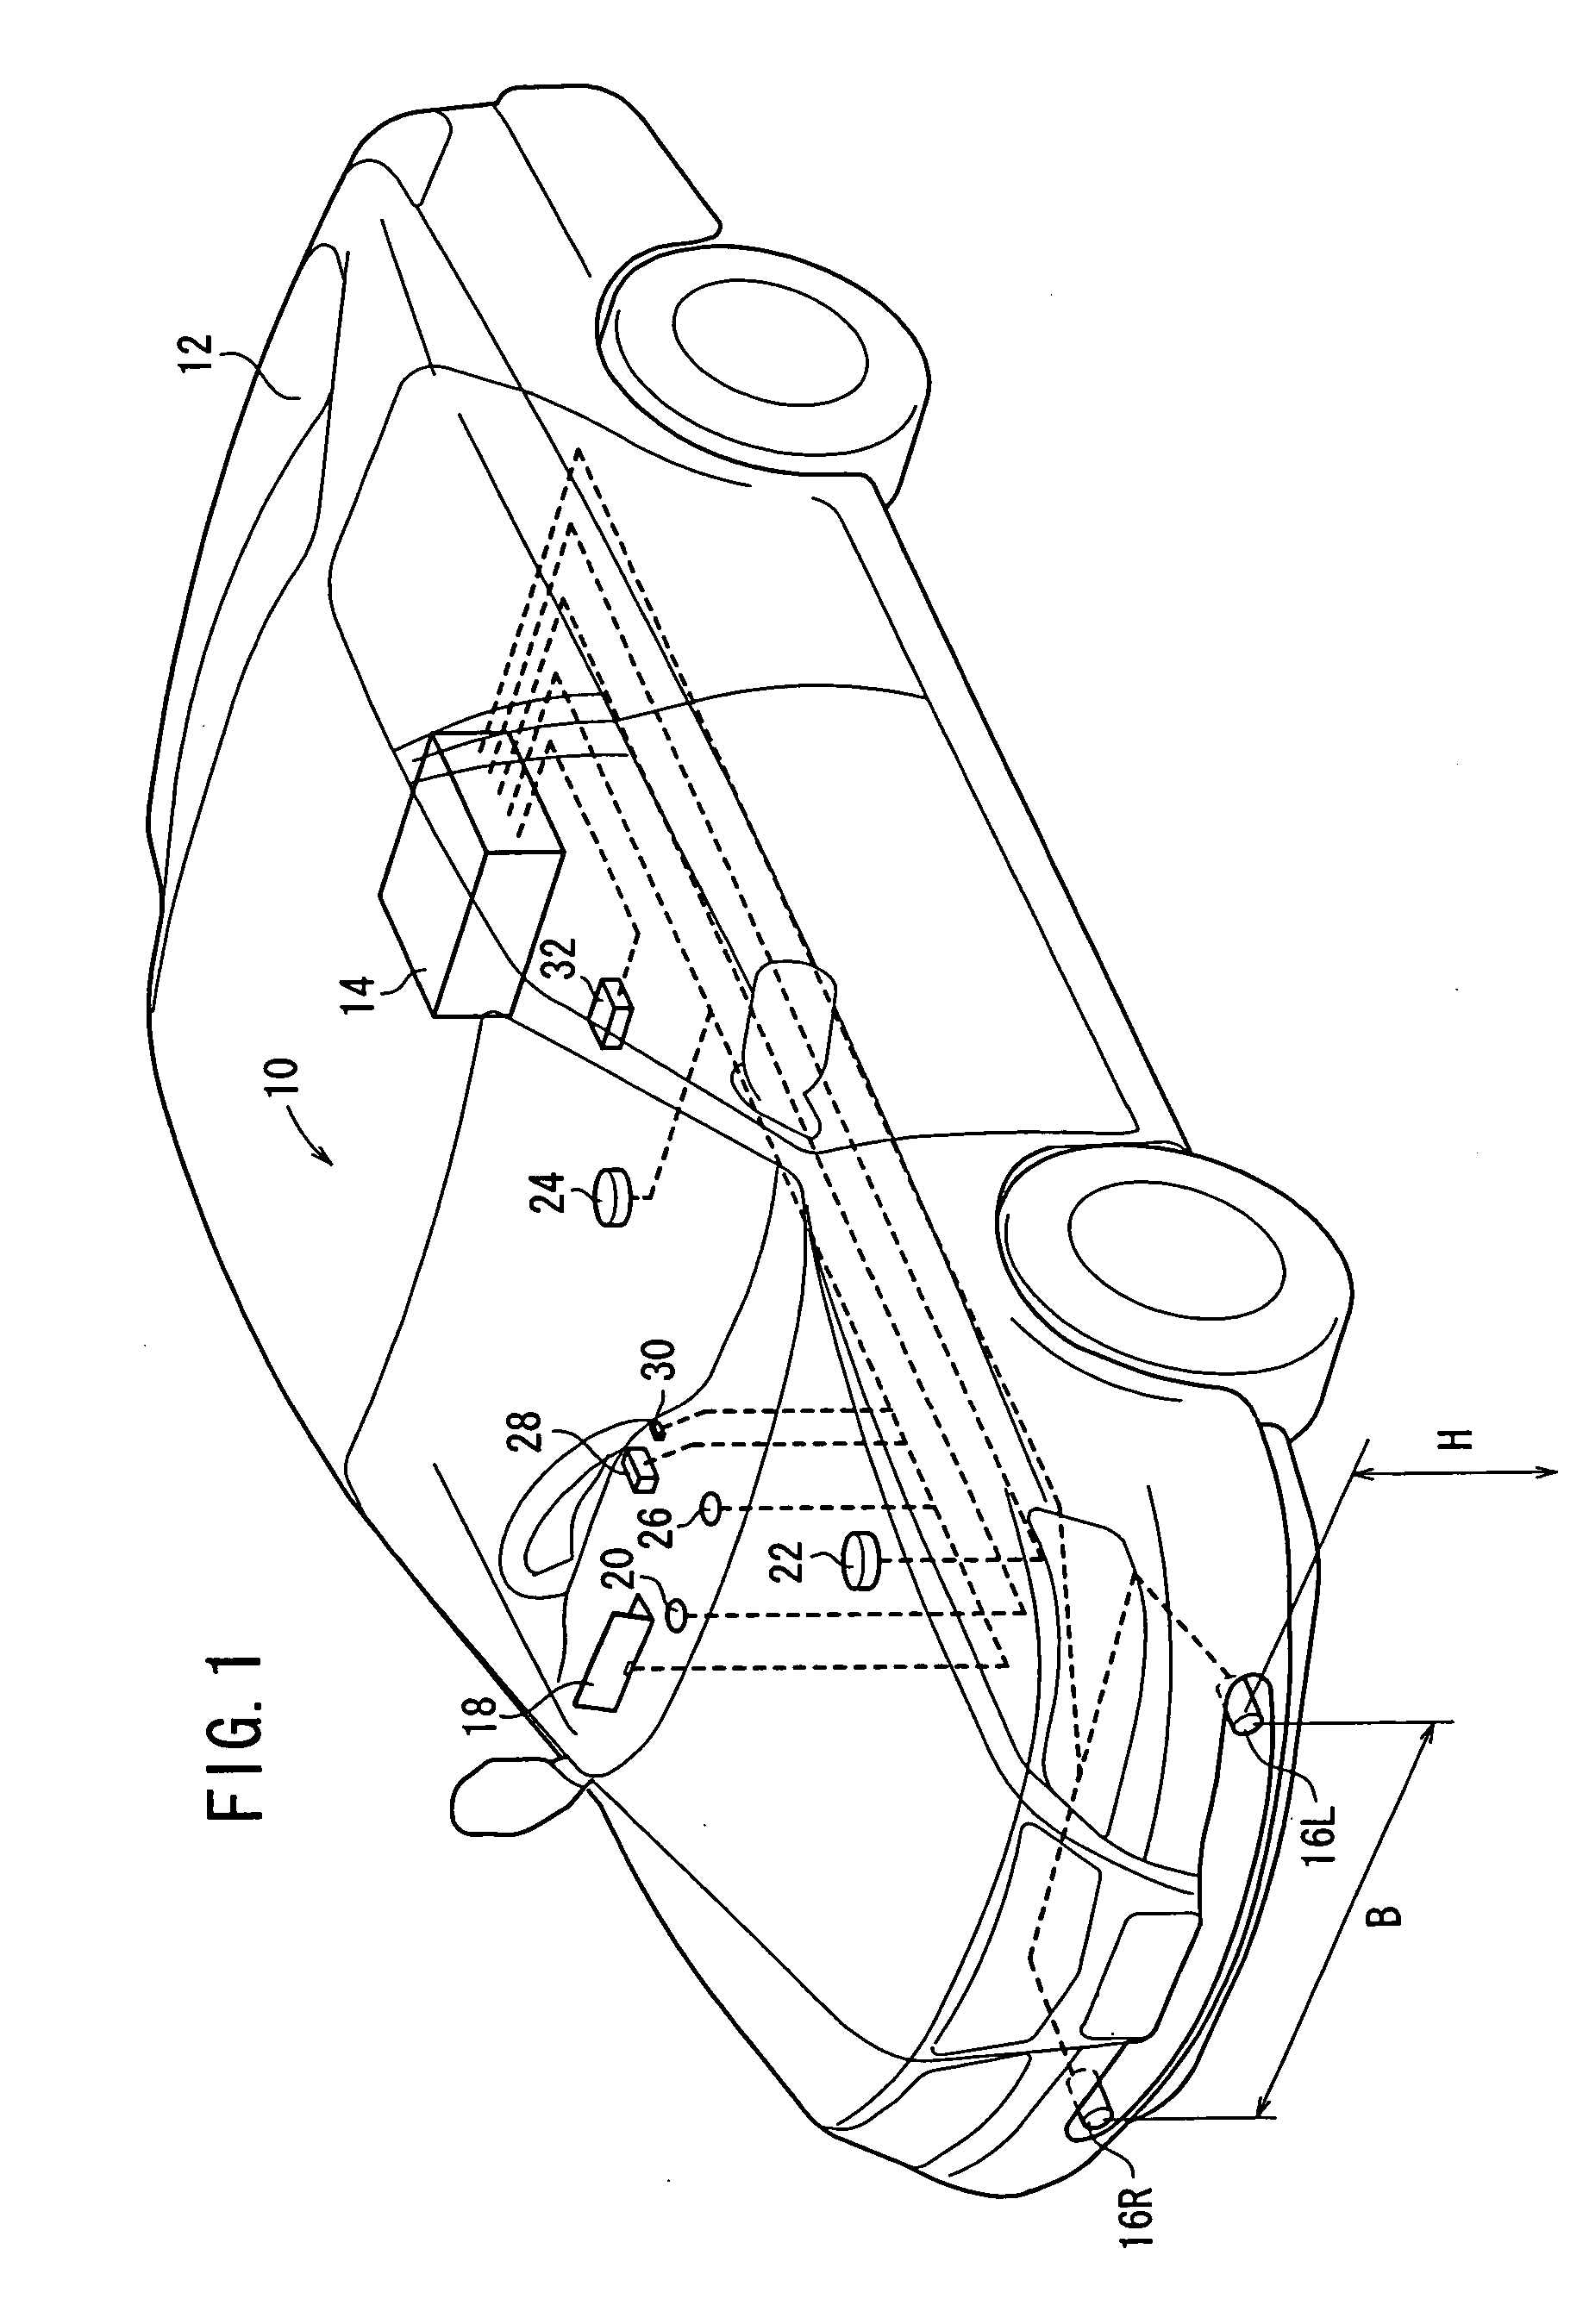 Position detecting apparatus and method of correcting data therein